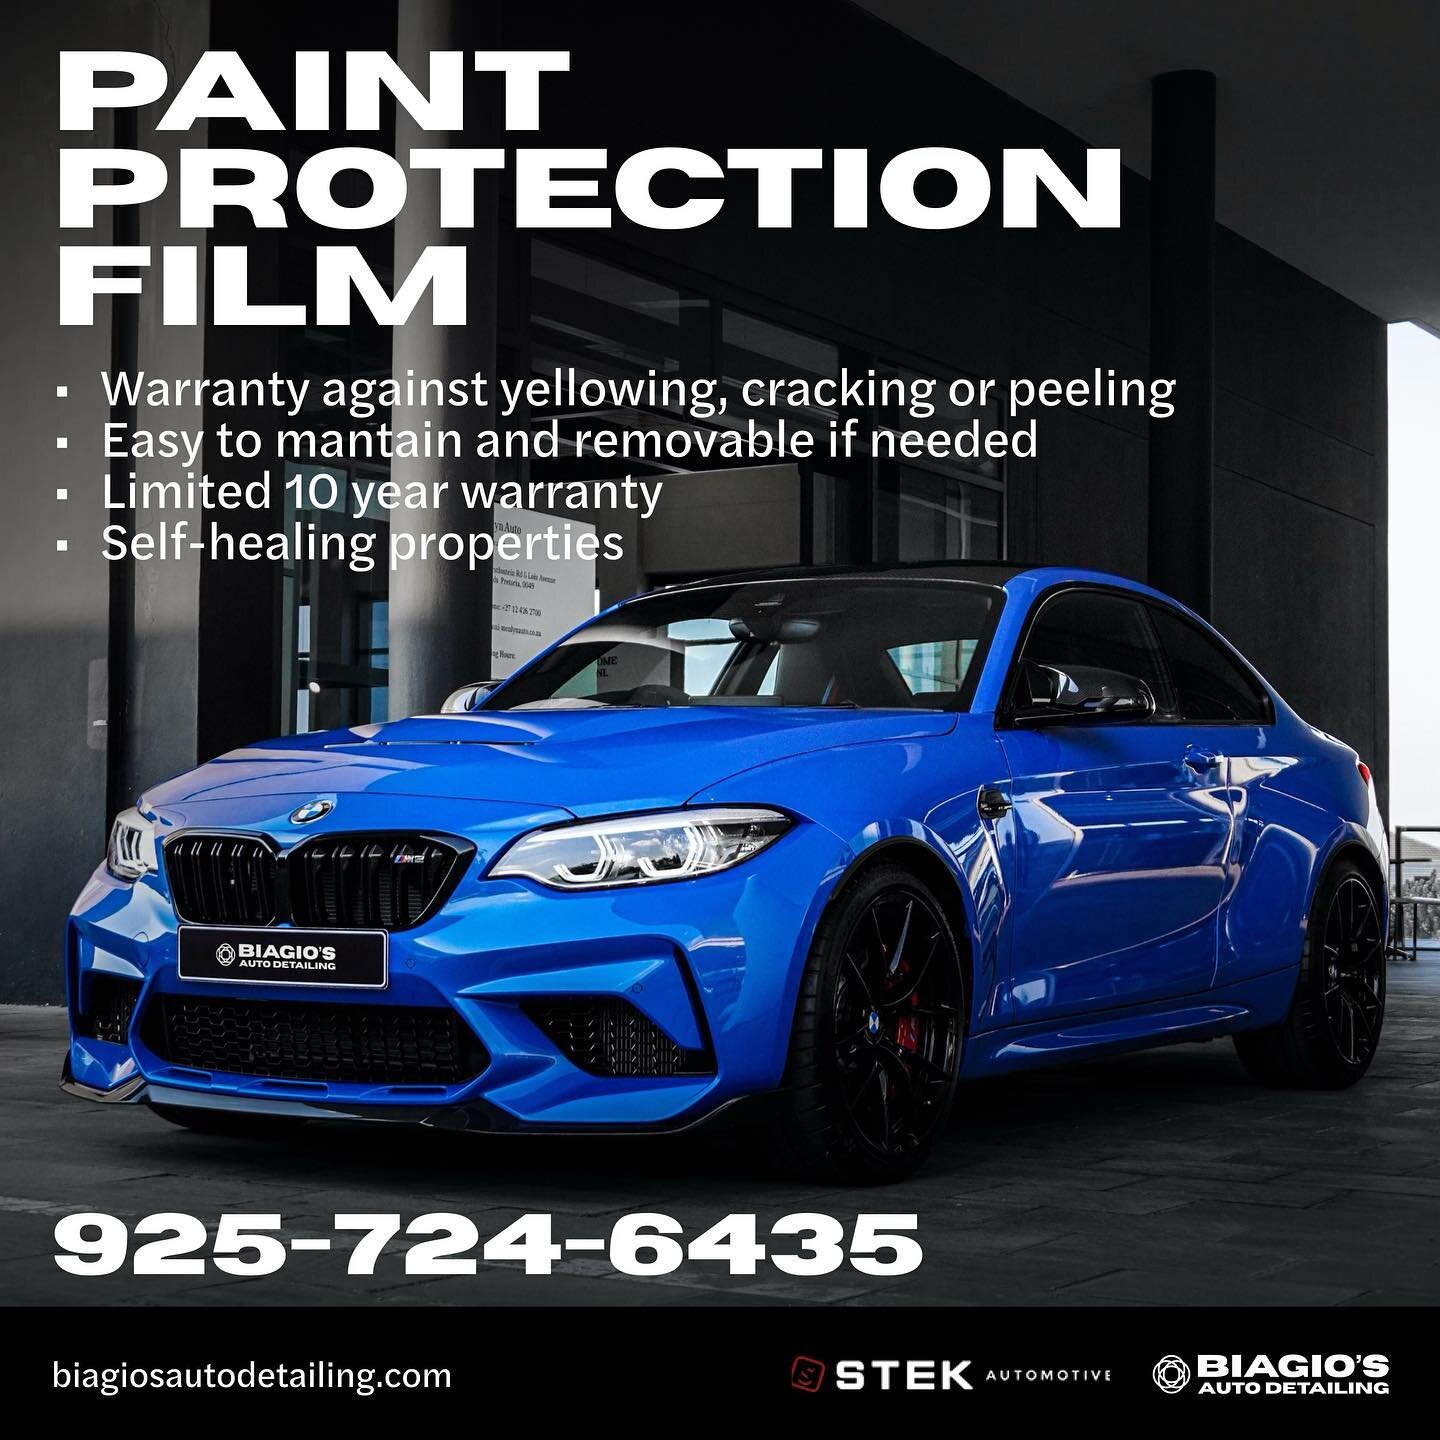 Take advantage of our Paint Protection Film (Clear Bra) deals for the month of November, December &amp; January! 
.
.
.
If you want your car to be perfect with shiny paint, and you want to keep the value as high as possible, the paint protection film